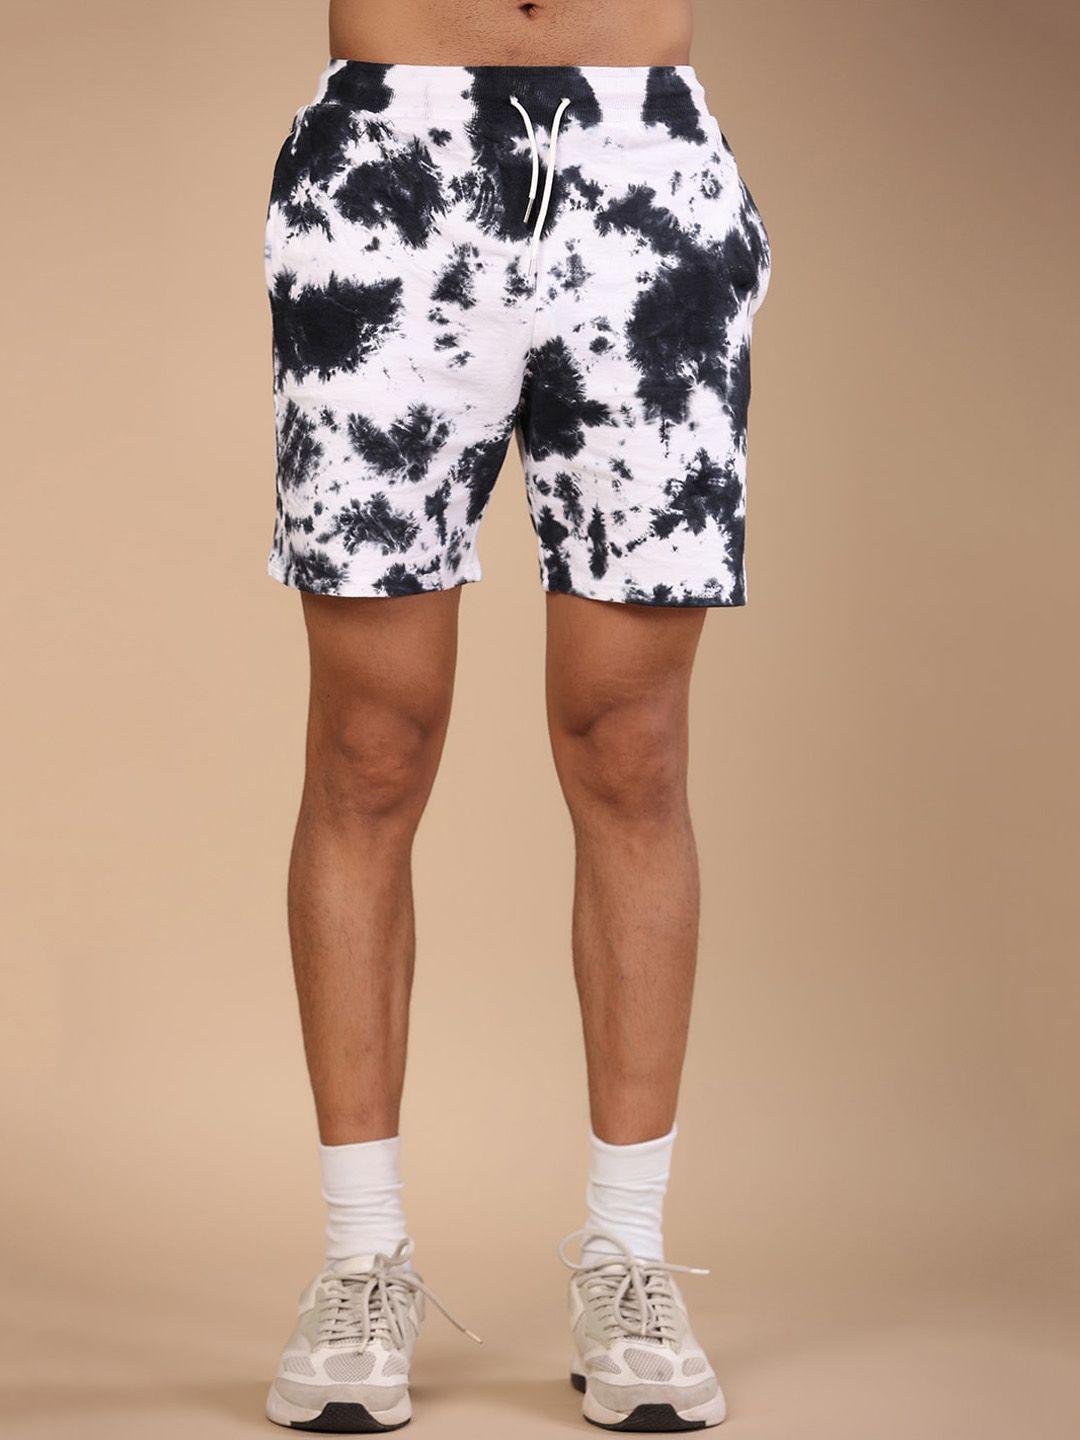 tistabene-men-abstract-printed-cotton-outdoor-shorts